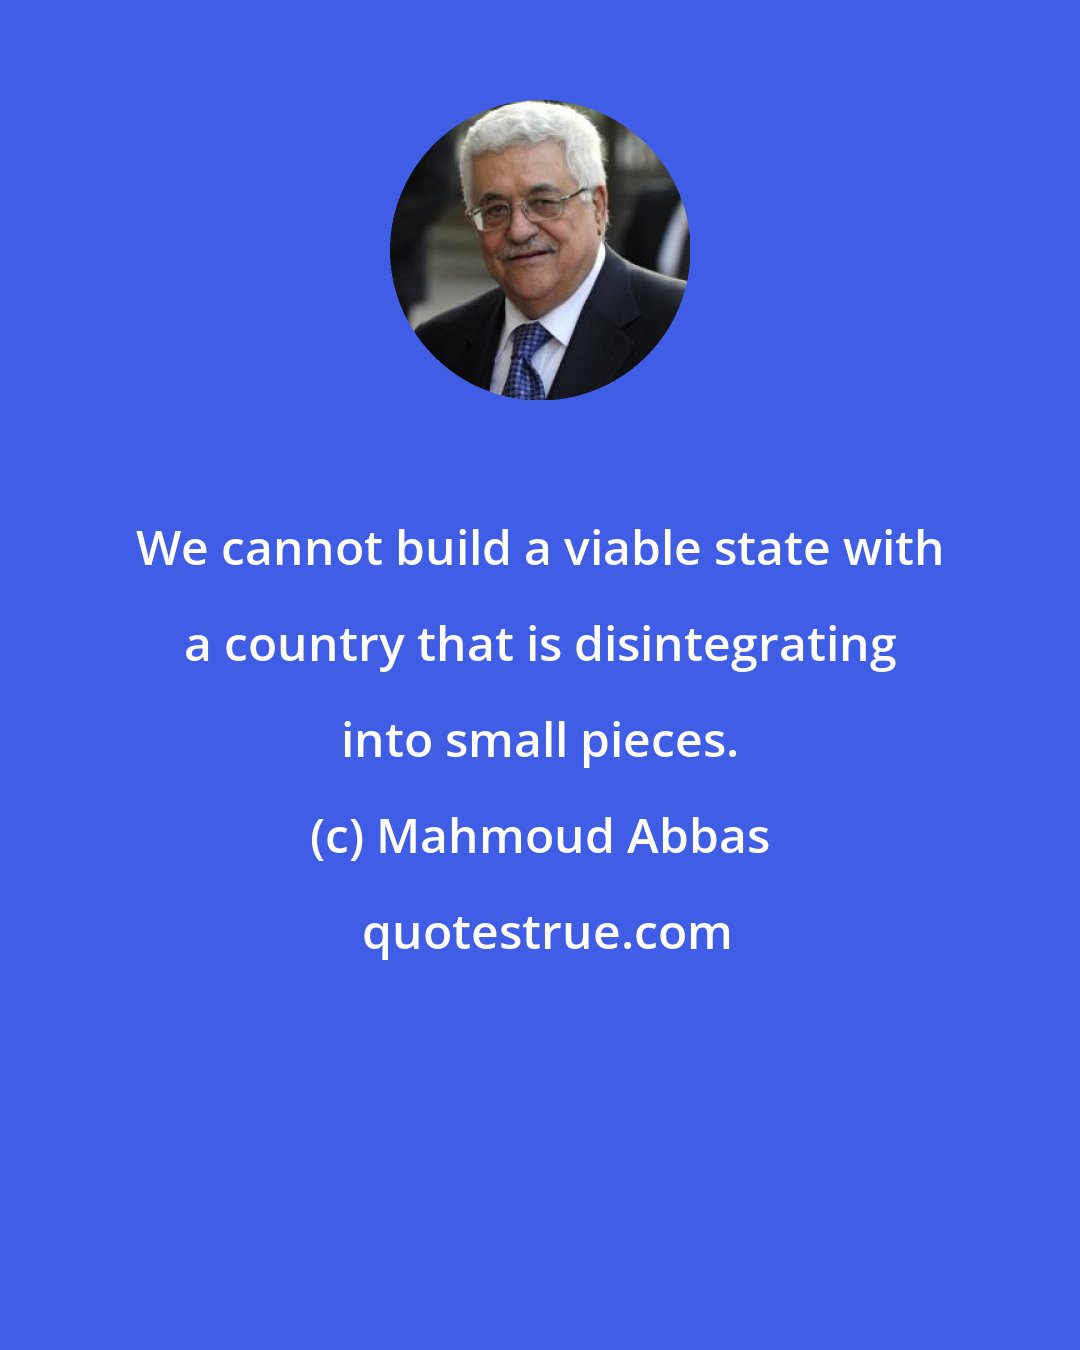 Mahmoud Abbas: We cannot build a viable state with a country that is disintegrating into small pieces.